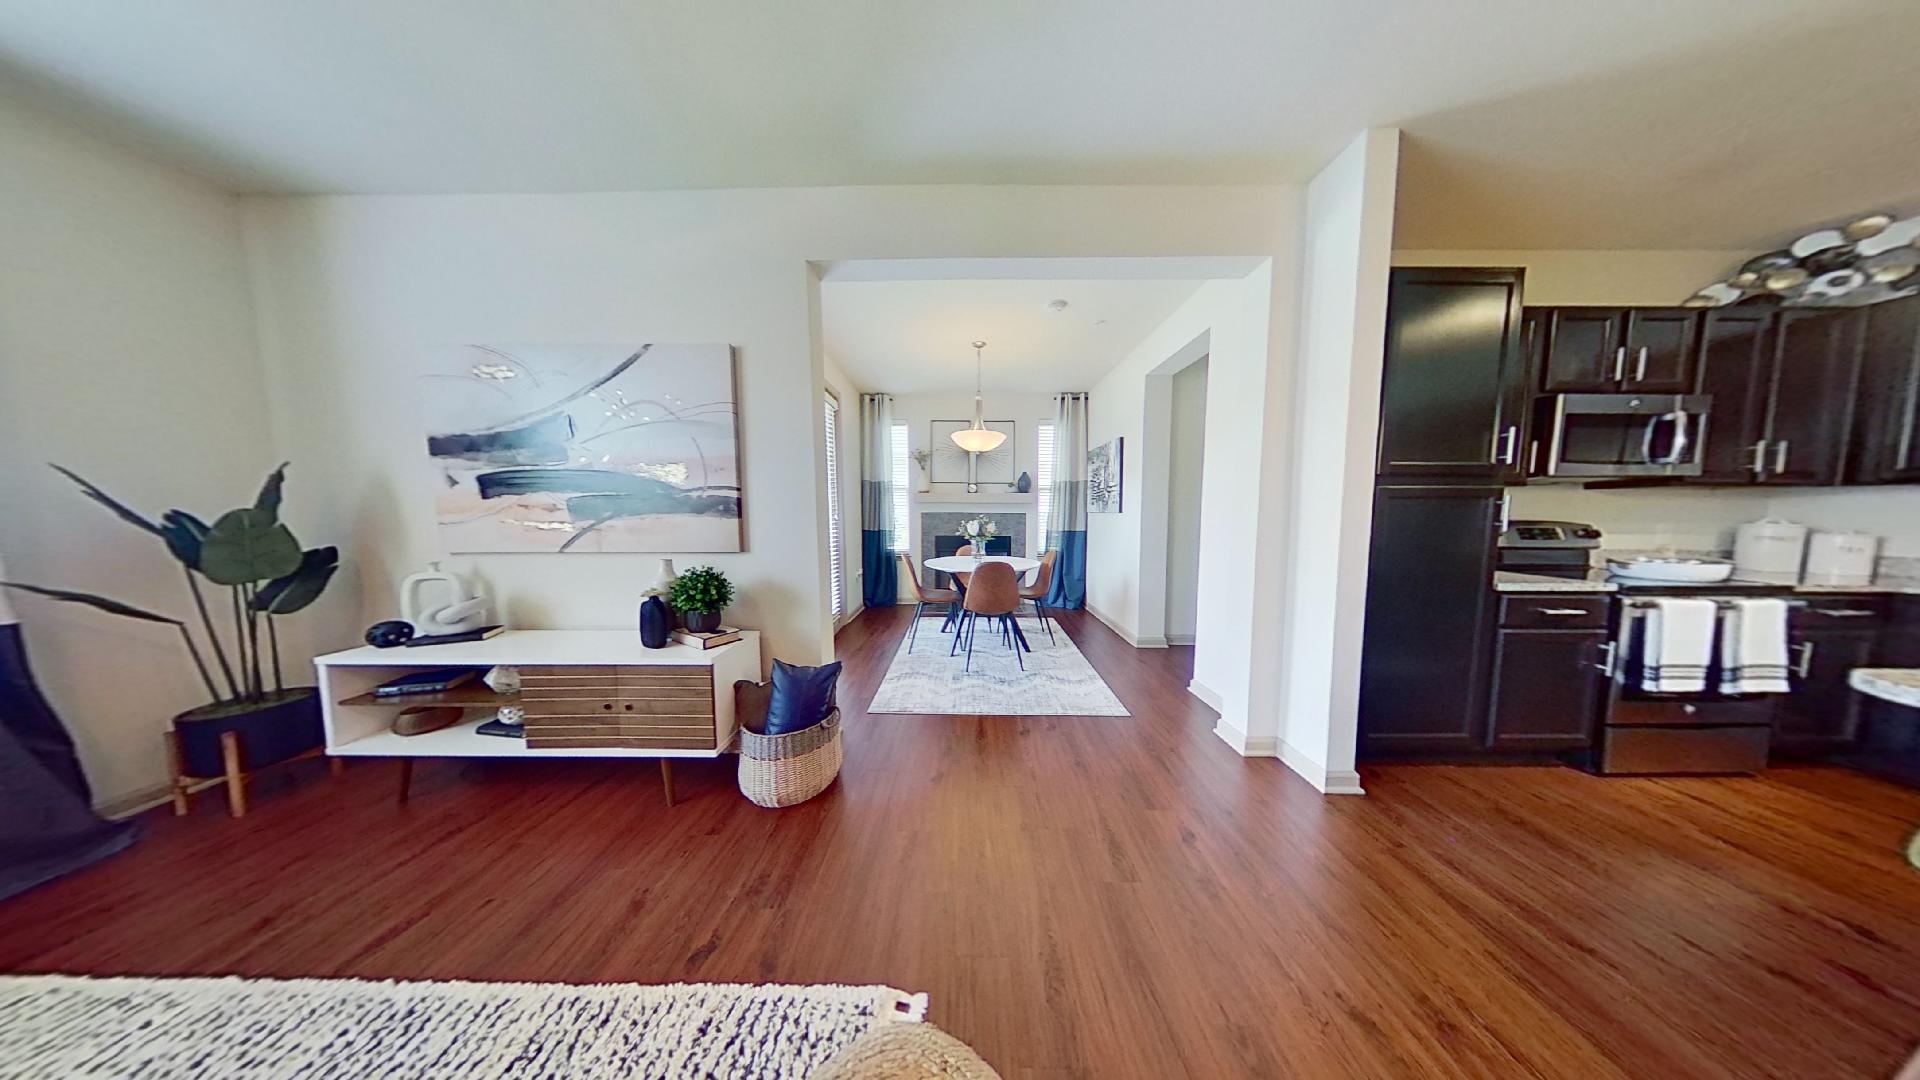 Premium Plank Flooring at The Reserve at Fountainview Apartments